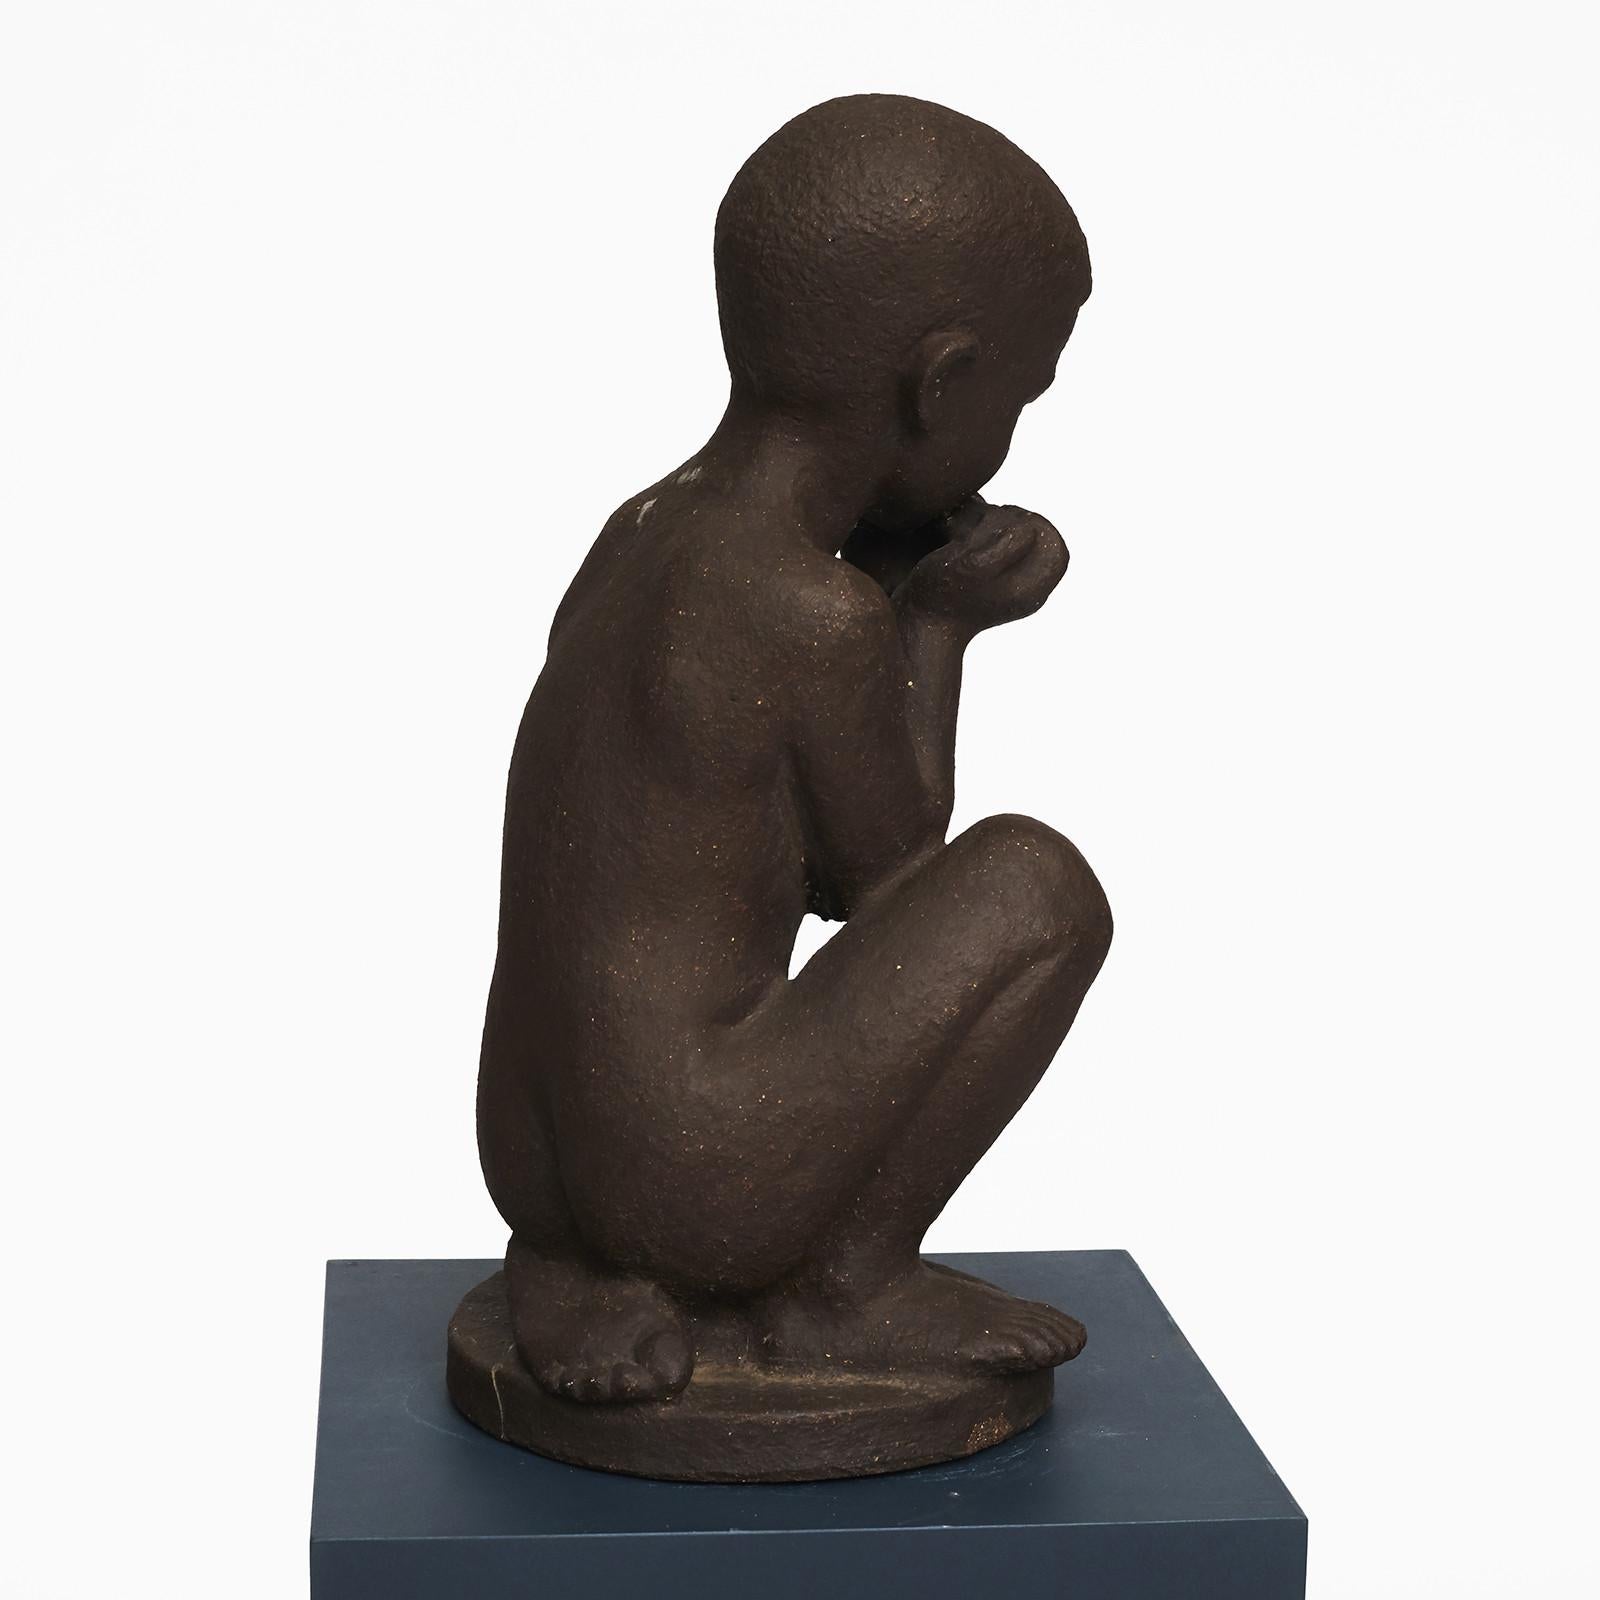 Large ceramic figurine.
Designed by Johannes Hansen (1903-1995) and manufactured by Knabstrup ceramic factory in Denmark.
Boy playing harmonica.
The figurine are made of dark chamotte clay without glaze.
The figurine of the boy has a firing crack on